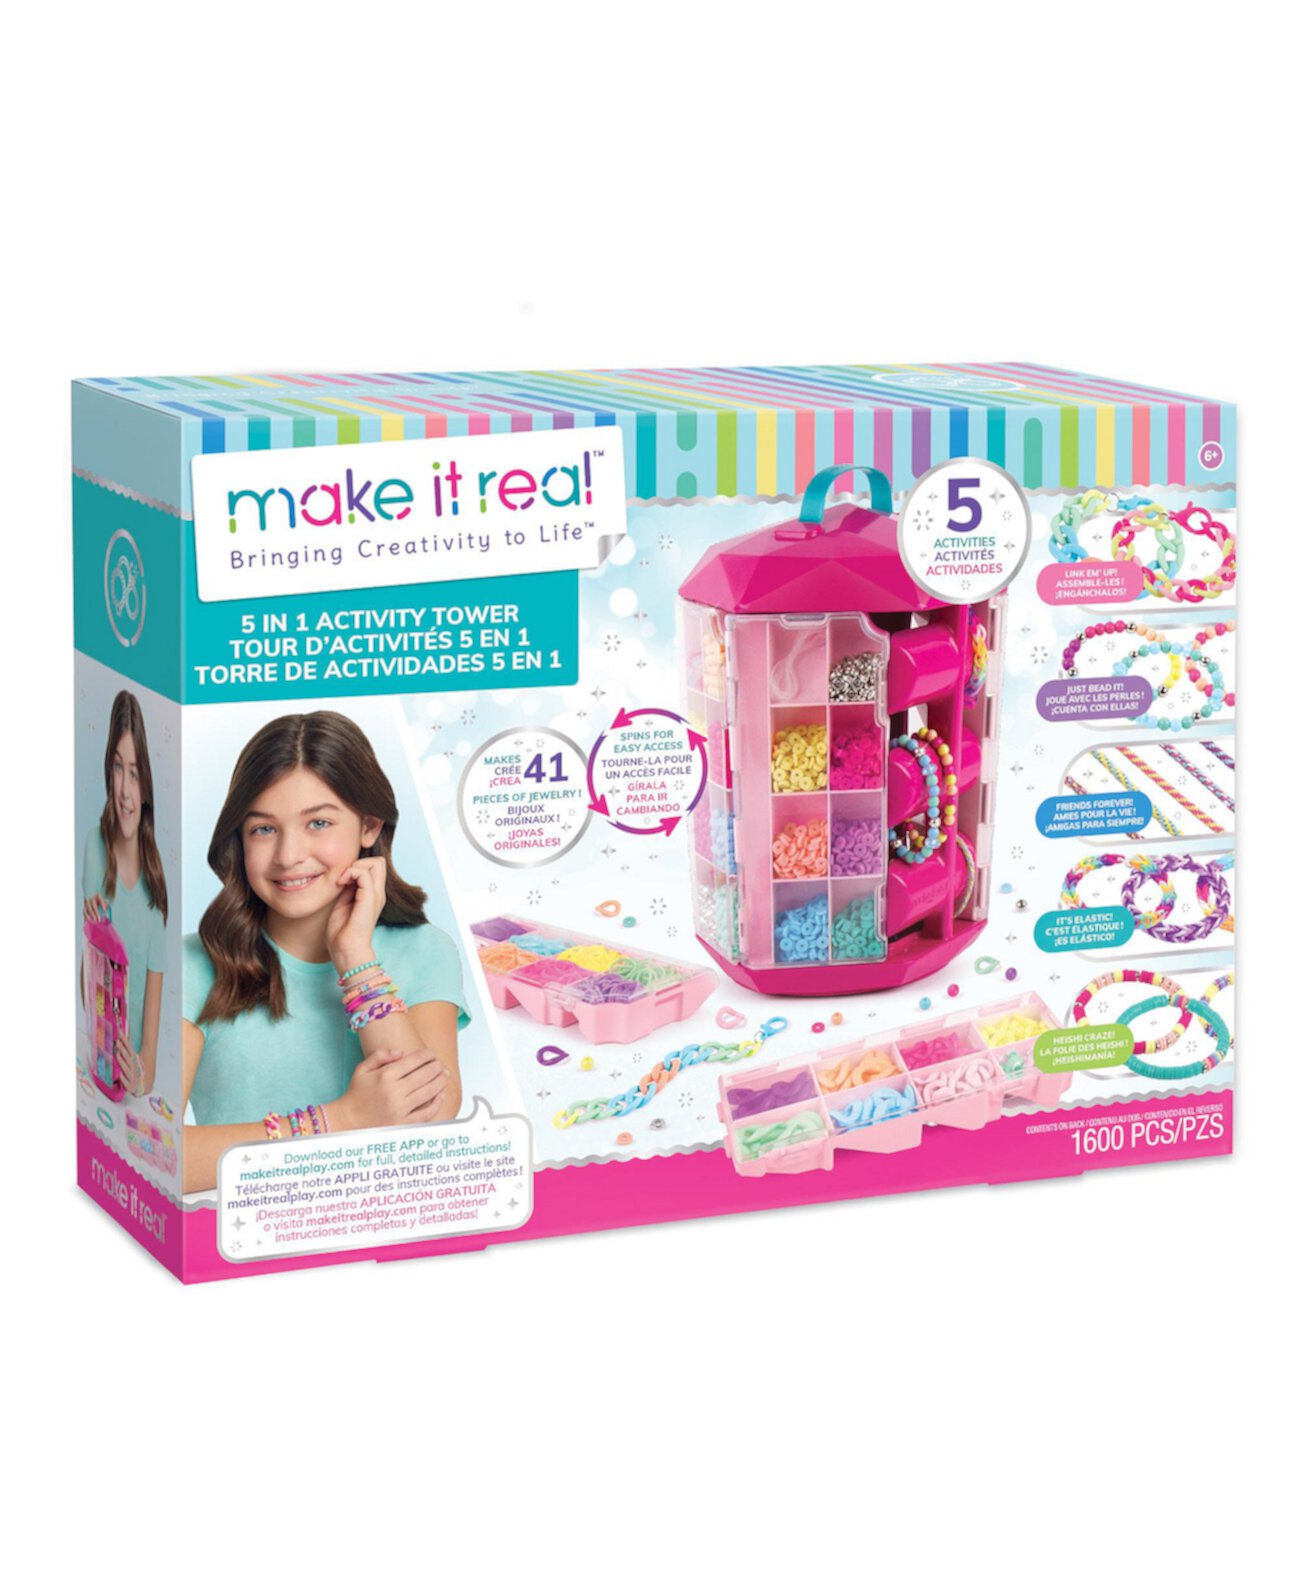 5 in 1 Activity Tower Bracelet Making Activity Tower and Storage Solution Make It Real